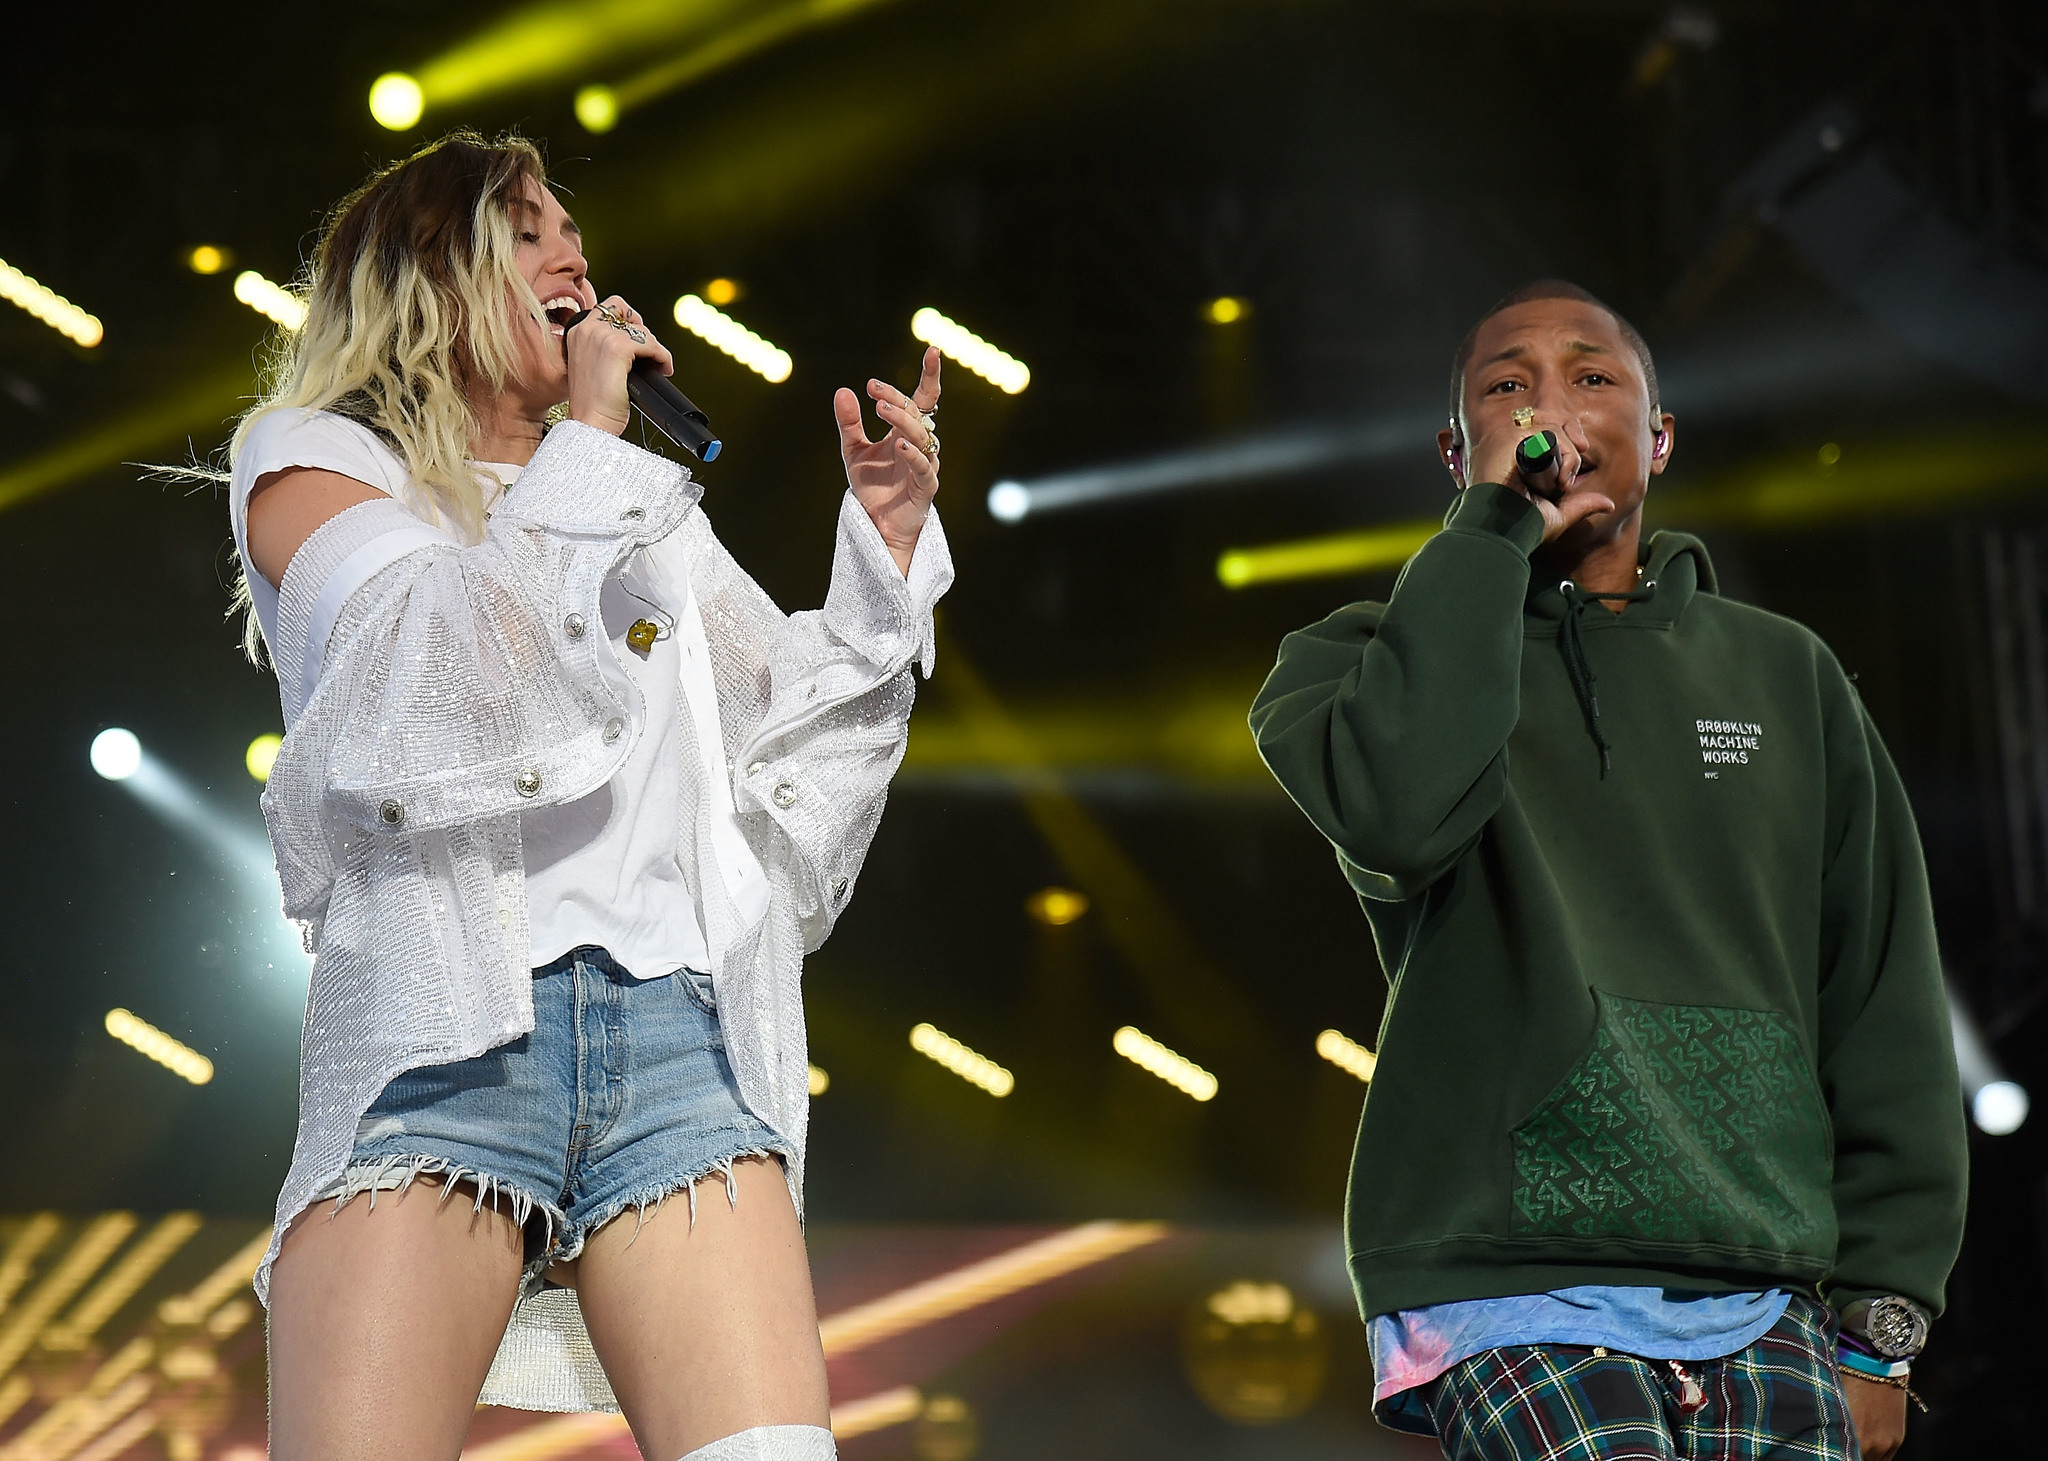 pharrell and Miley